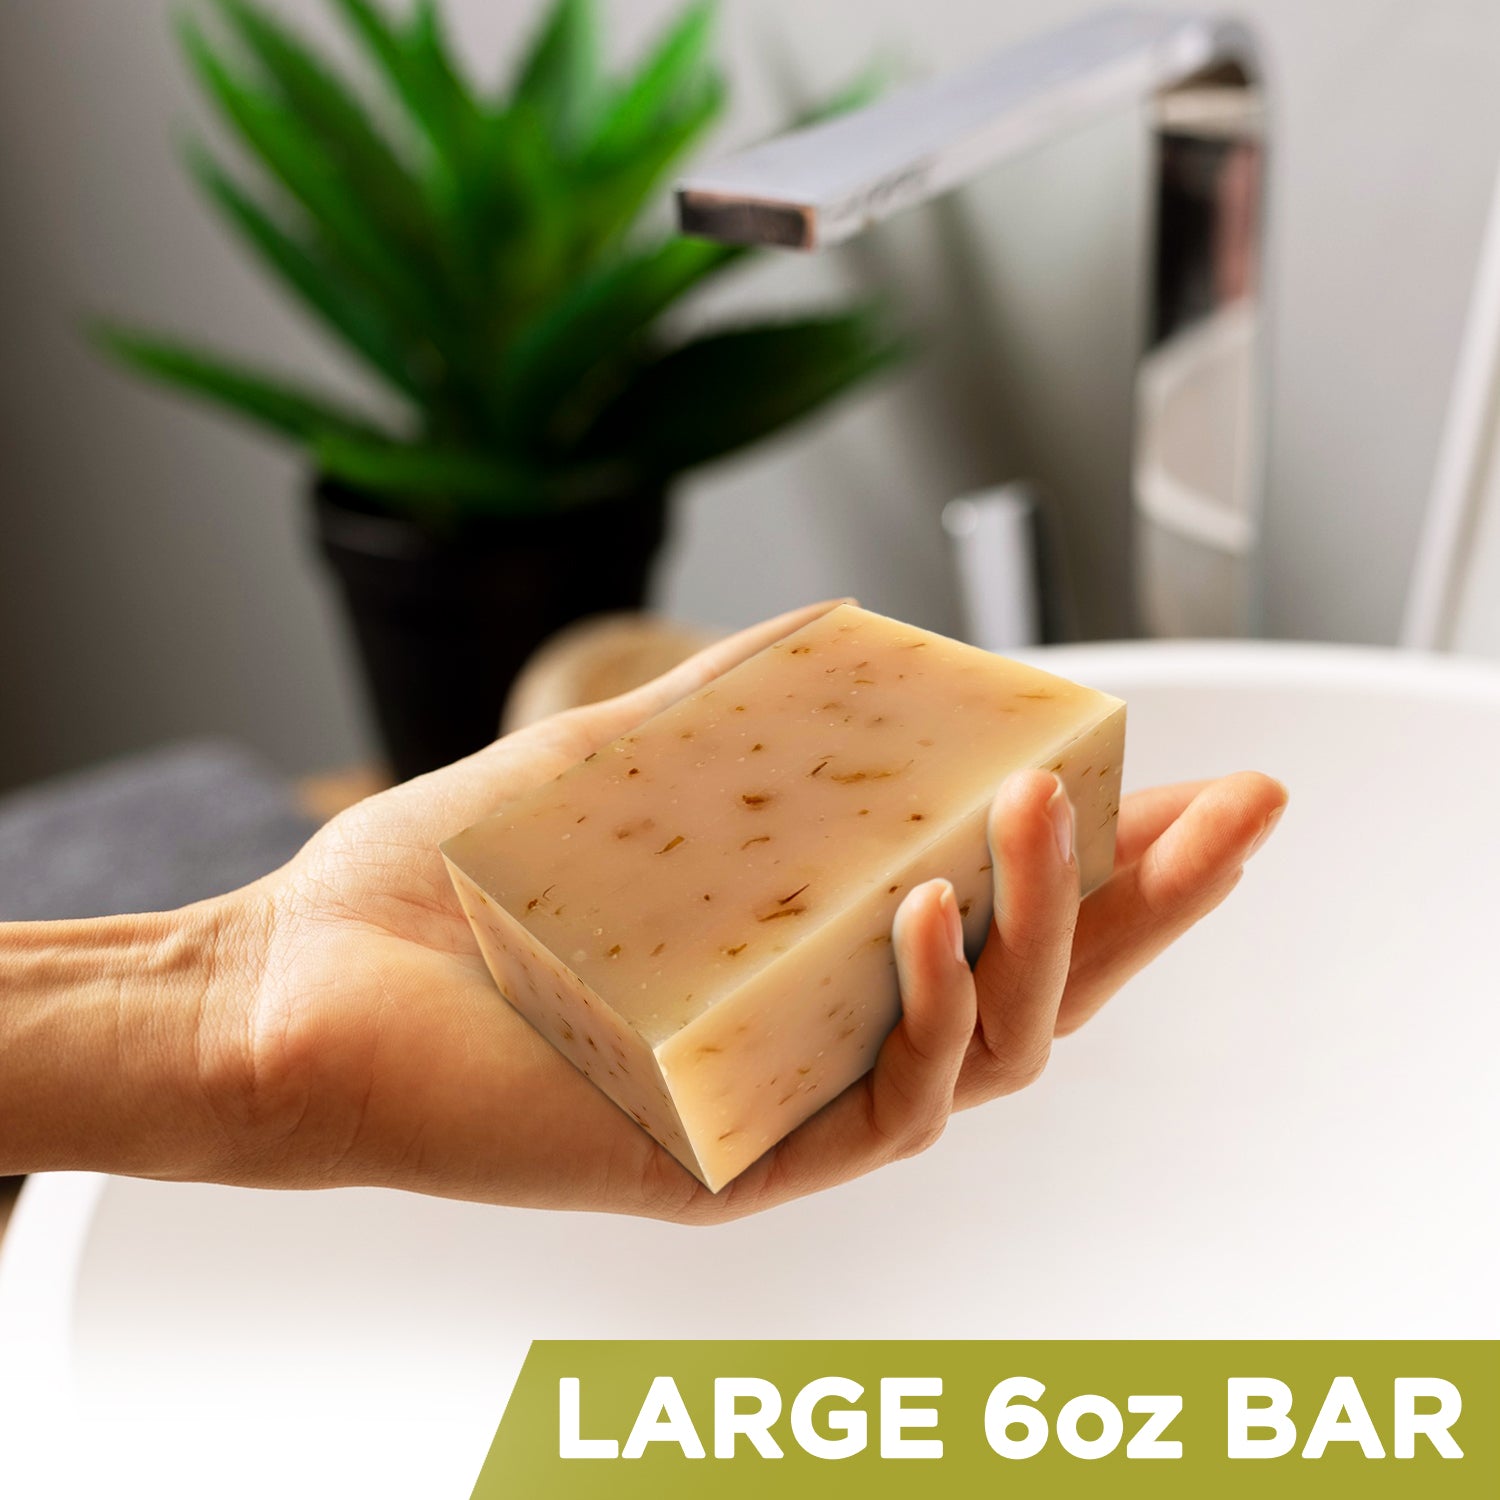 Introducing Our New Sage and Wild Herbs Soap!